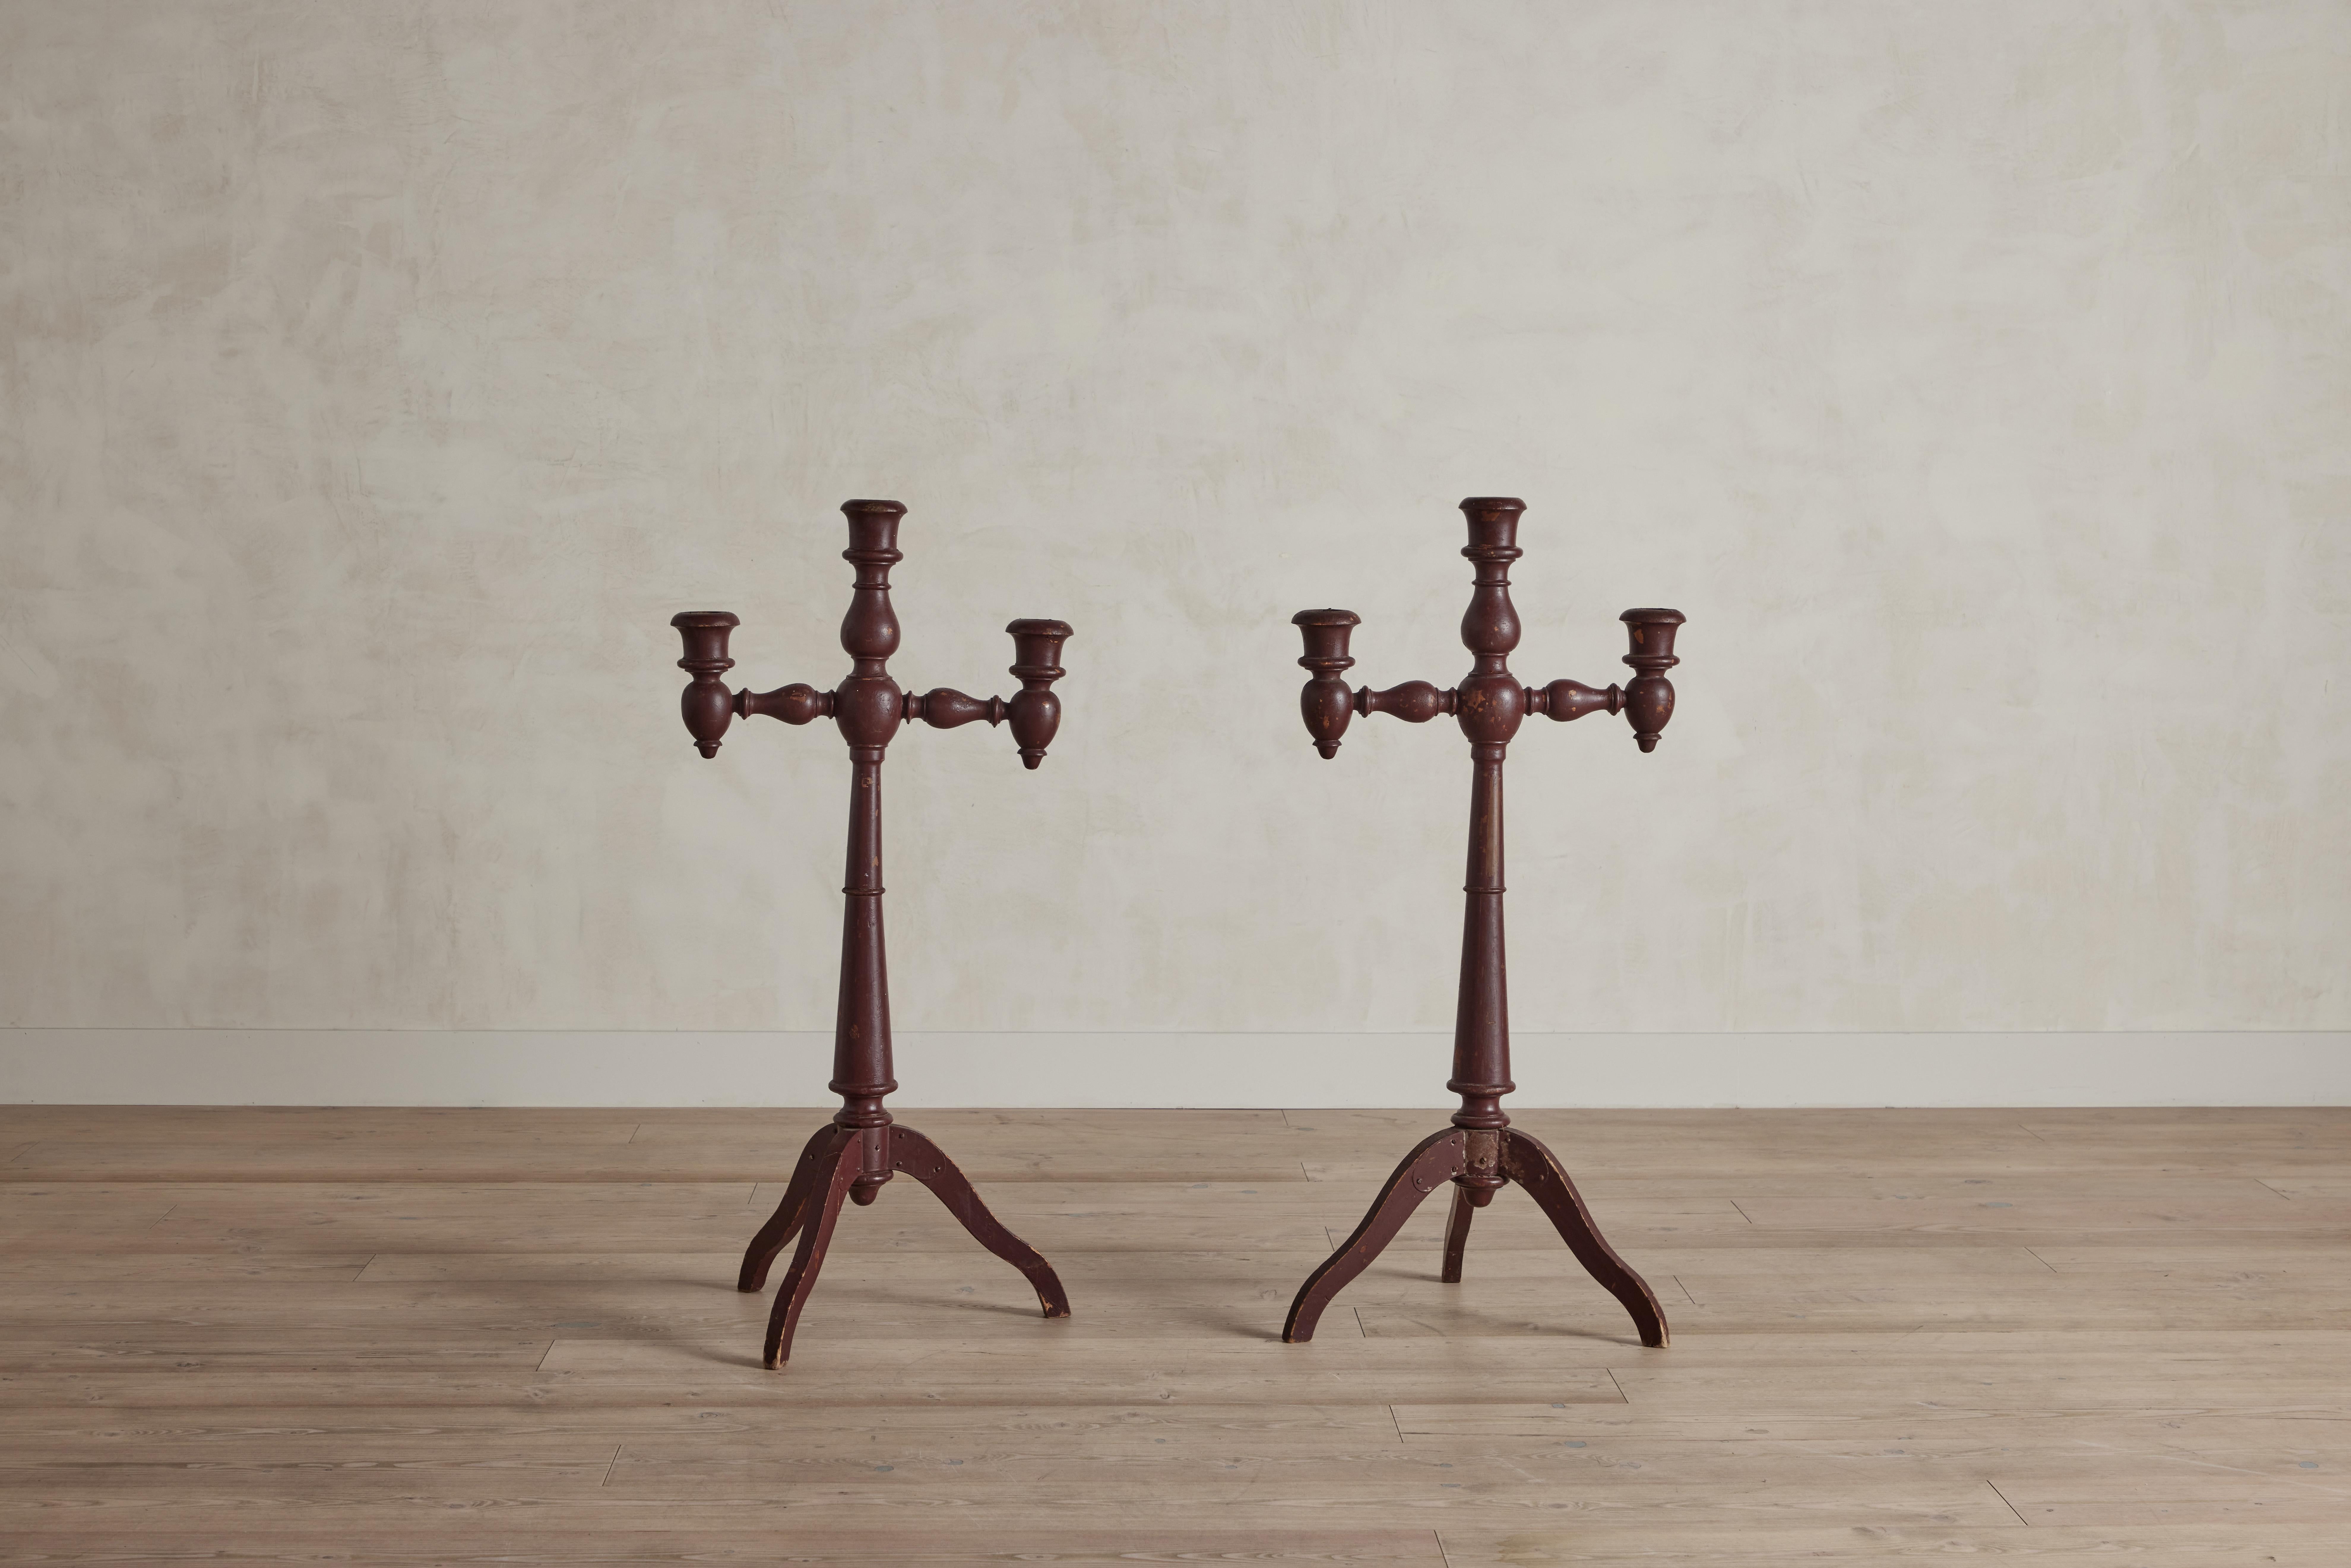 A pair of large red painted turned wood altar candlesticks from France circa 1850. Candlesticks measure 45.5” inches tall. Wear on wood and finish is consistent with age and use.